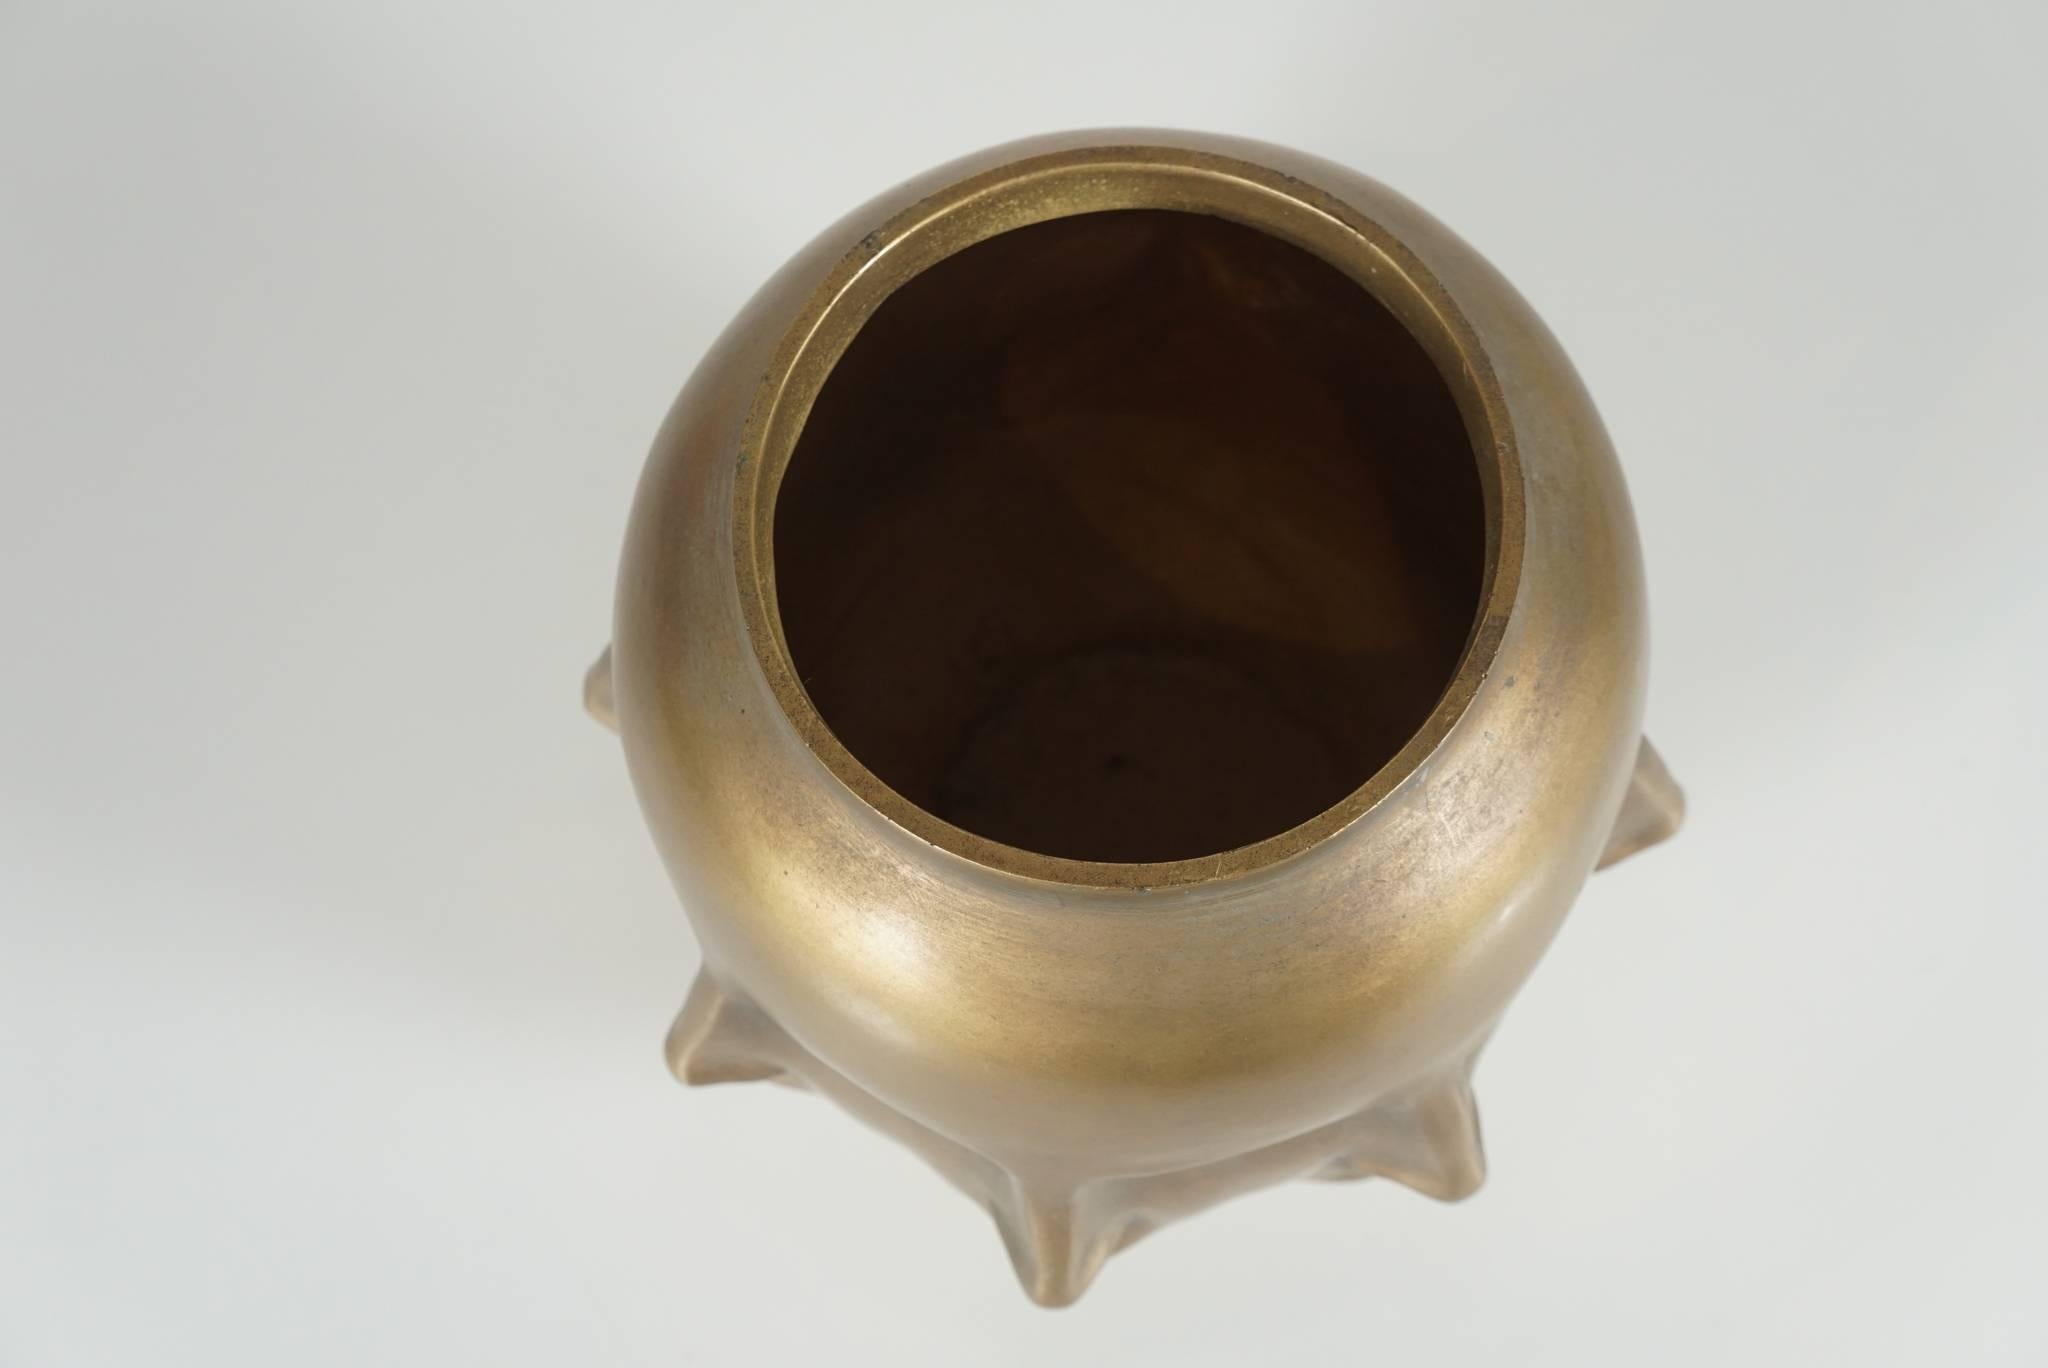 Dora Maar Perpetual Vase in Gold In Excellent Condition For Sale In Hudson, NY